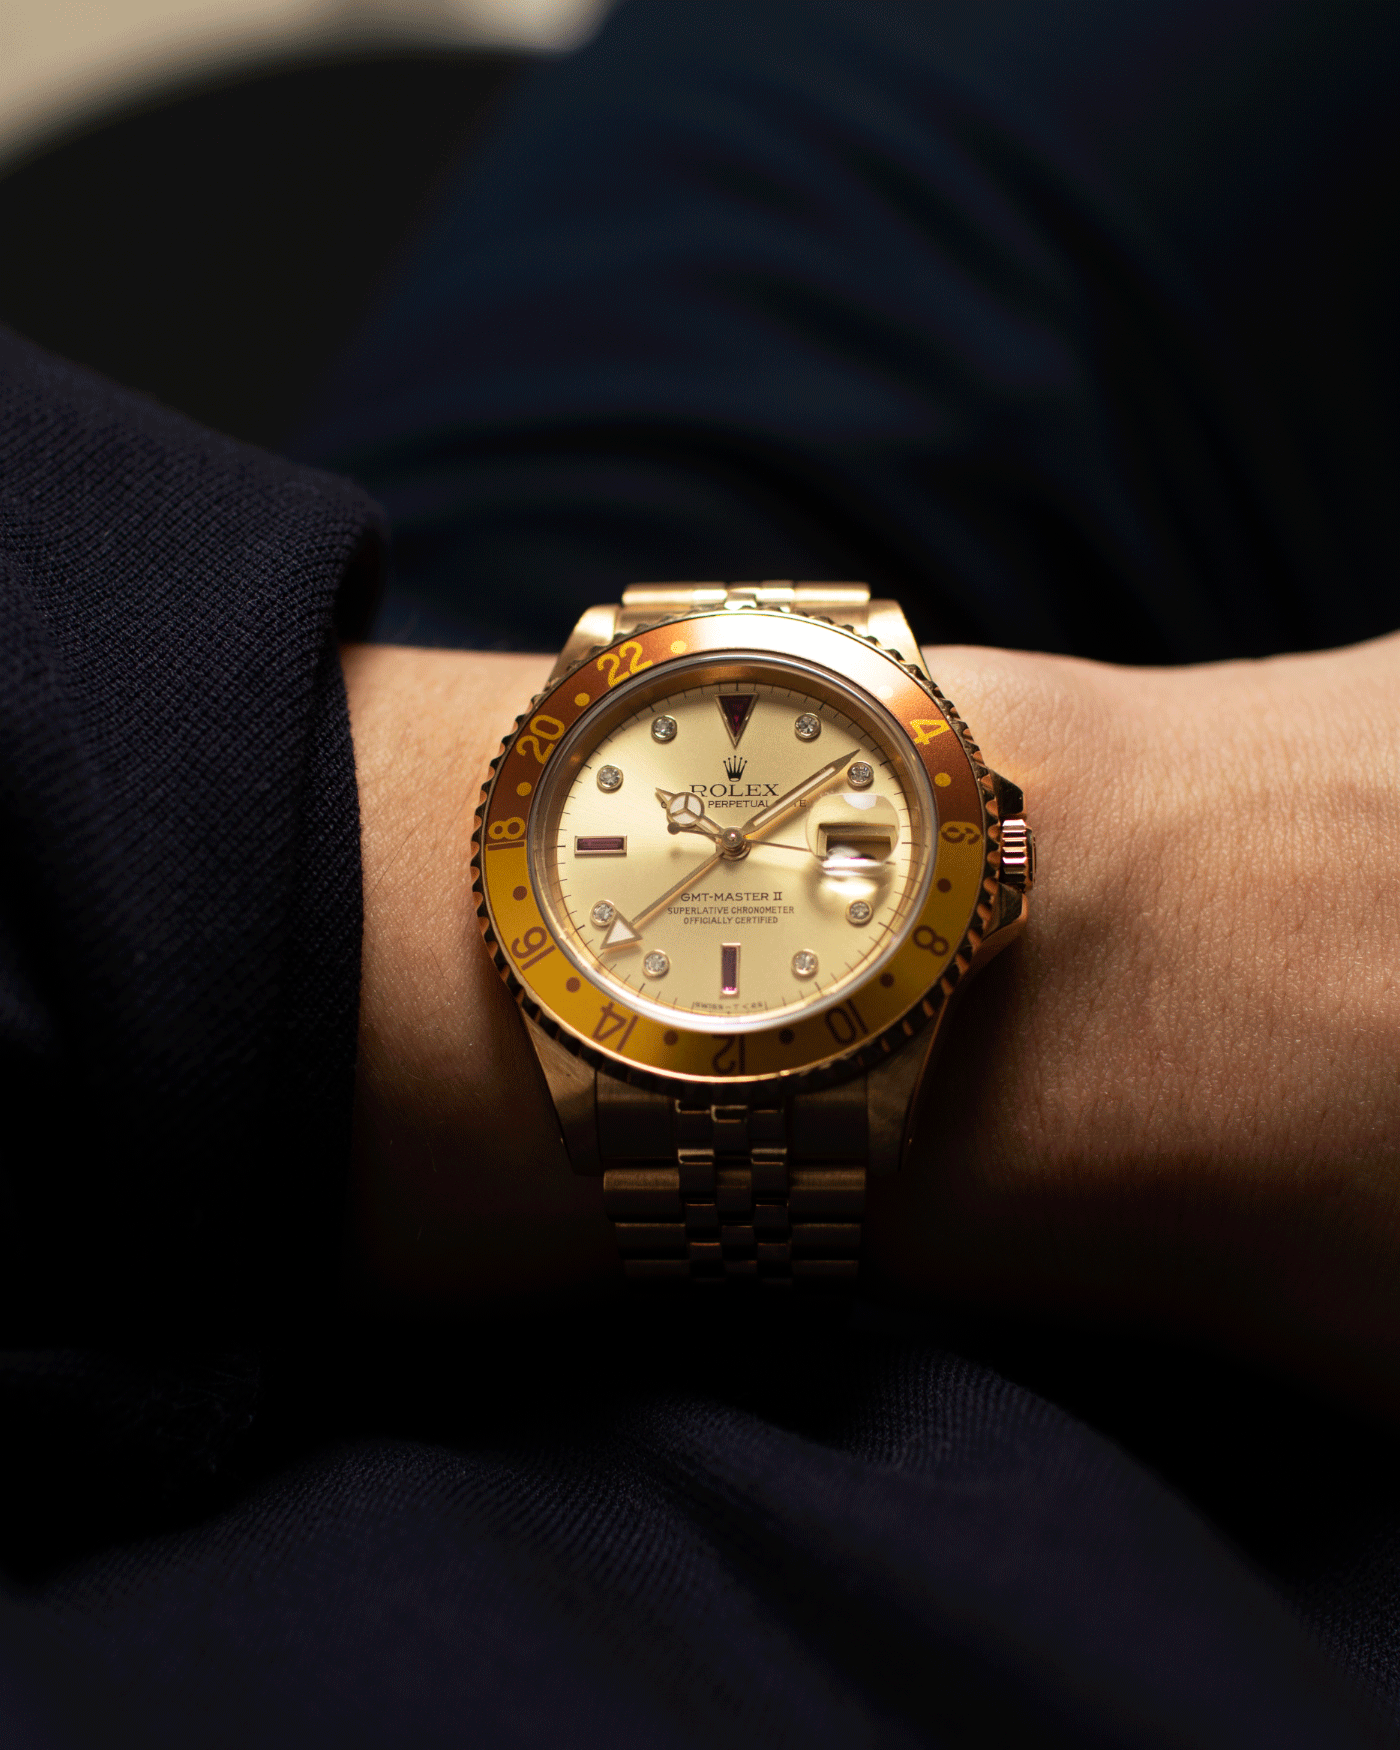 Brand: Rolex Year: 1990 Model: GMT-Master Reference Number: 167187 Serial Number: E Serial Material: 18k Yellow Gold Movement: Cal. 3185 Case Diameter: 40mm Lug Width: 20mm Strap: 18k Yellow Gold Rolex 8386 Jubilee Bracelet with ’47B’ End Links